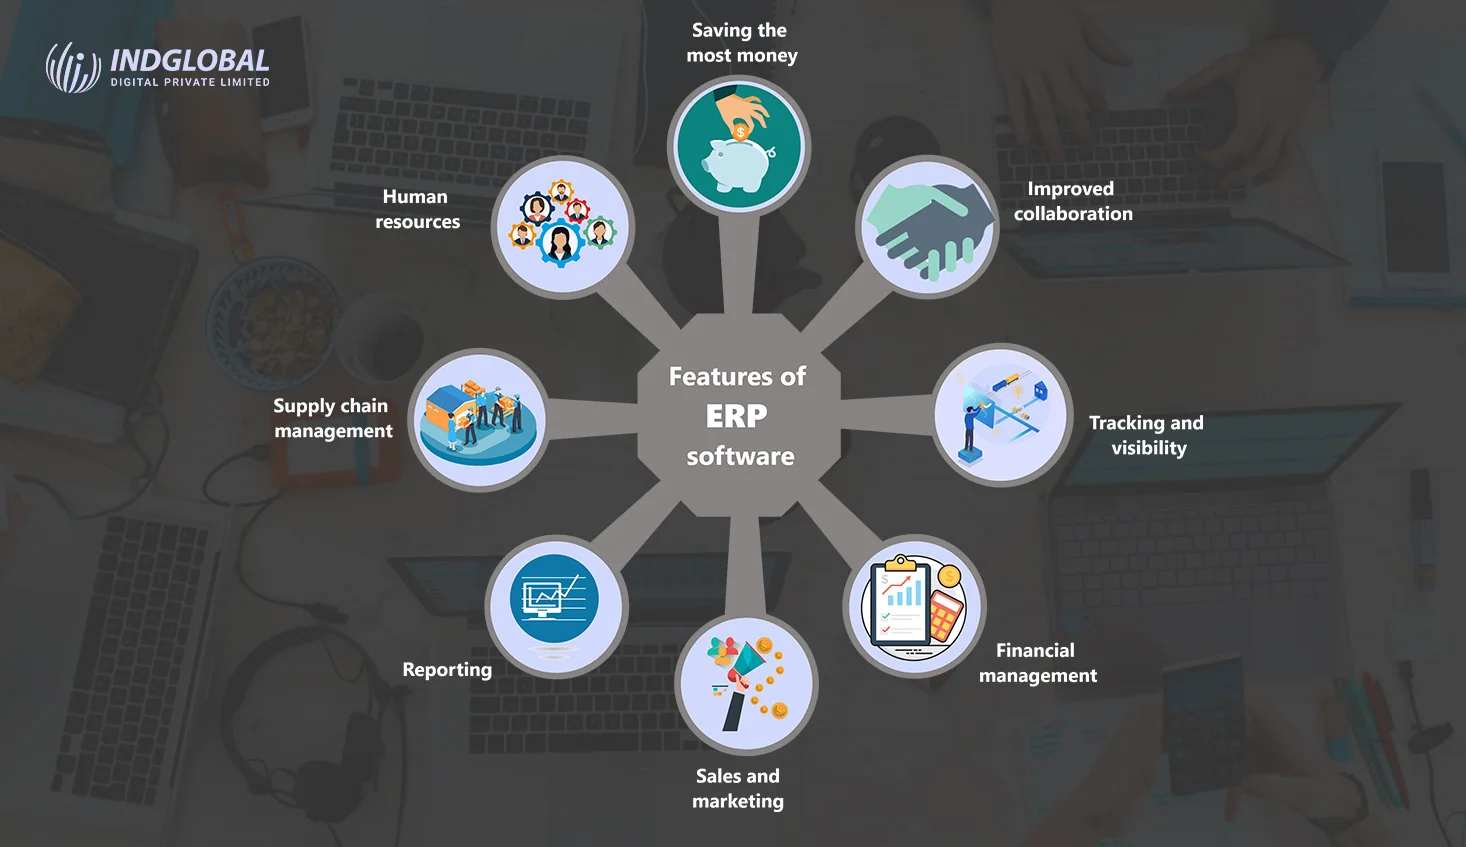 Features of ERP software 